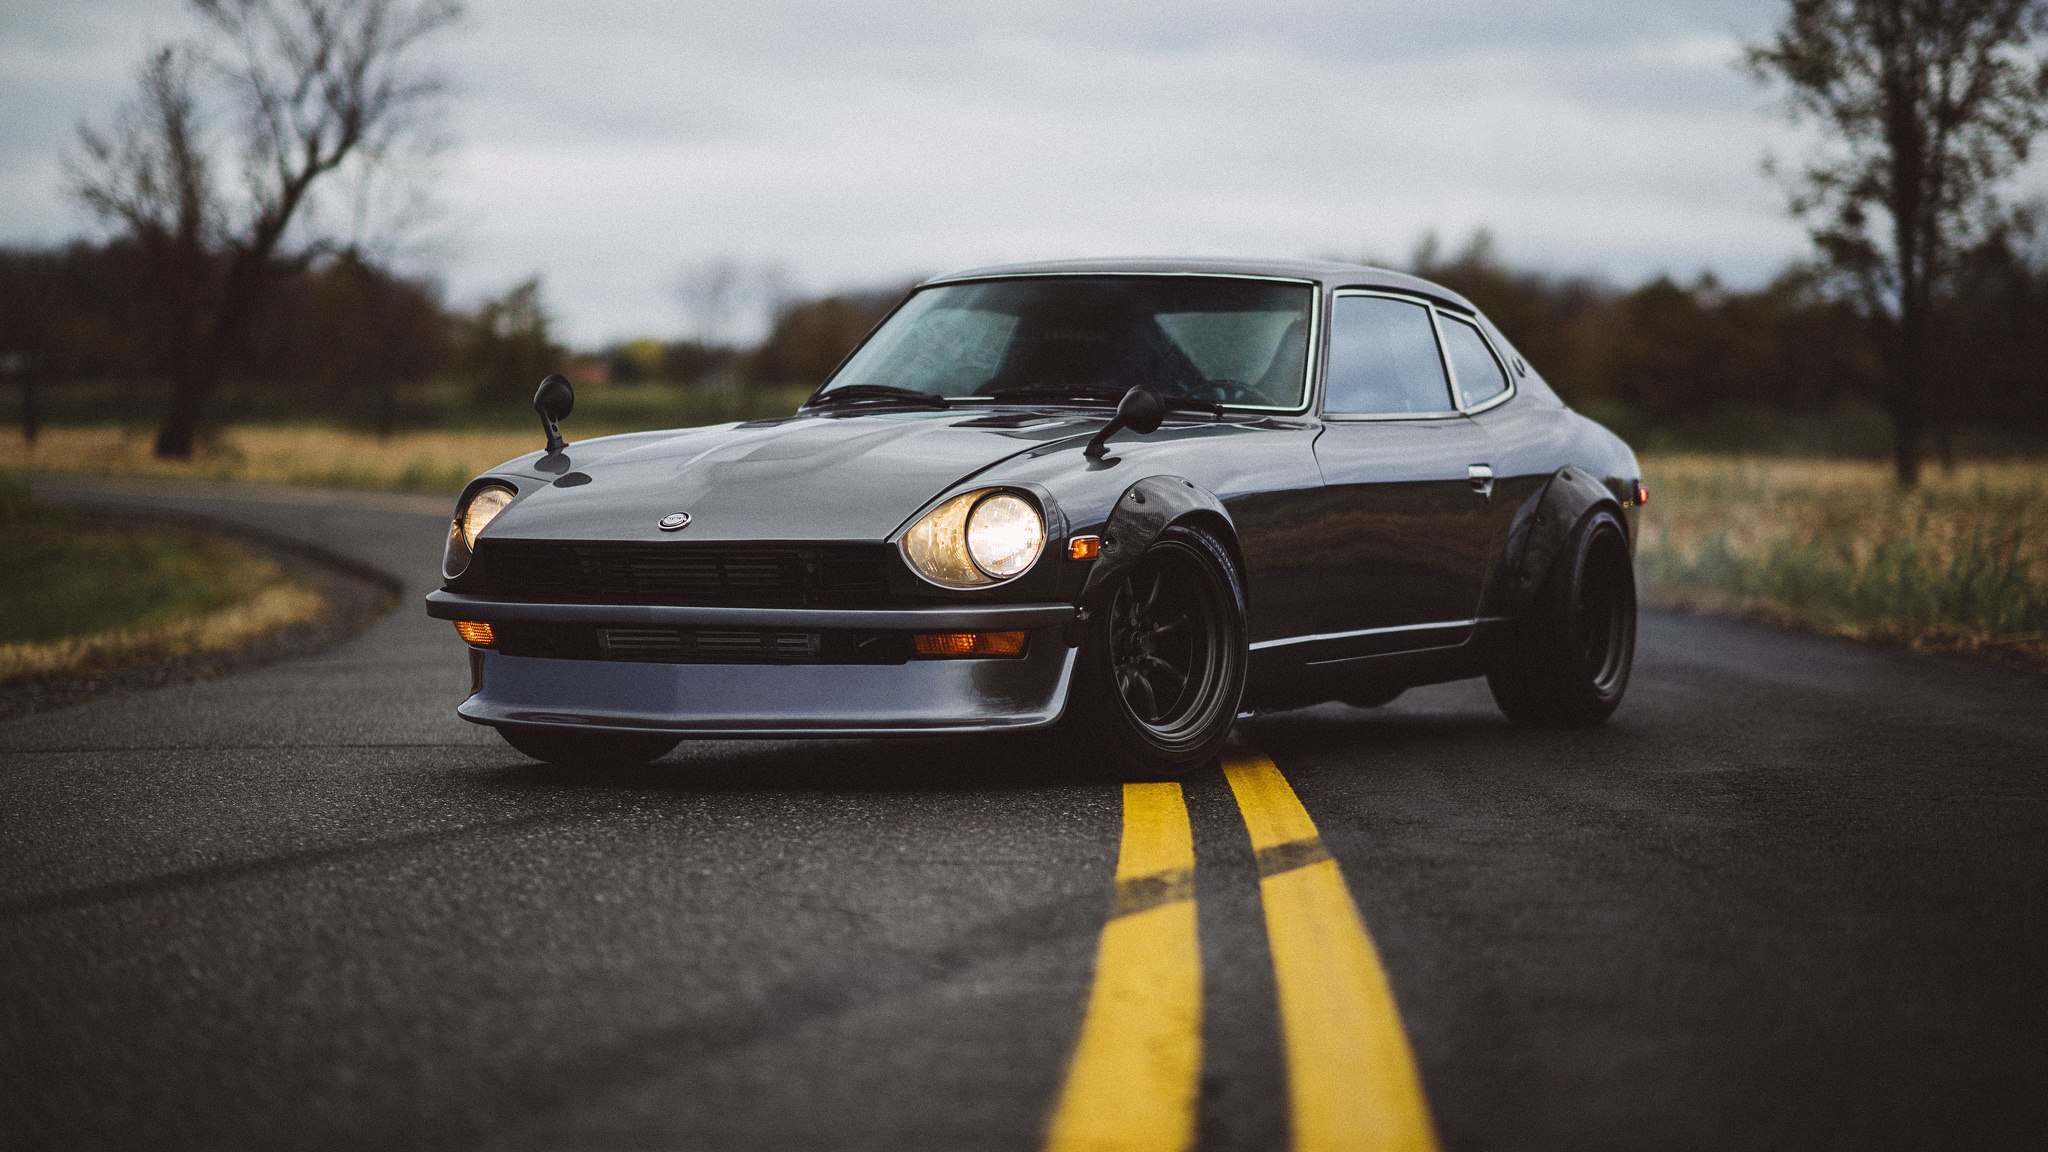 Datsun 240z Background Pictures For Pc G Sfdcy